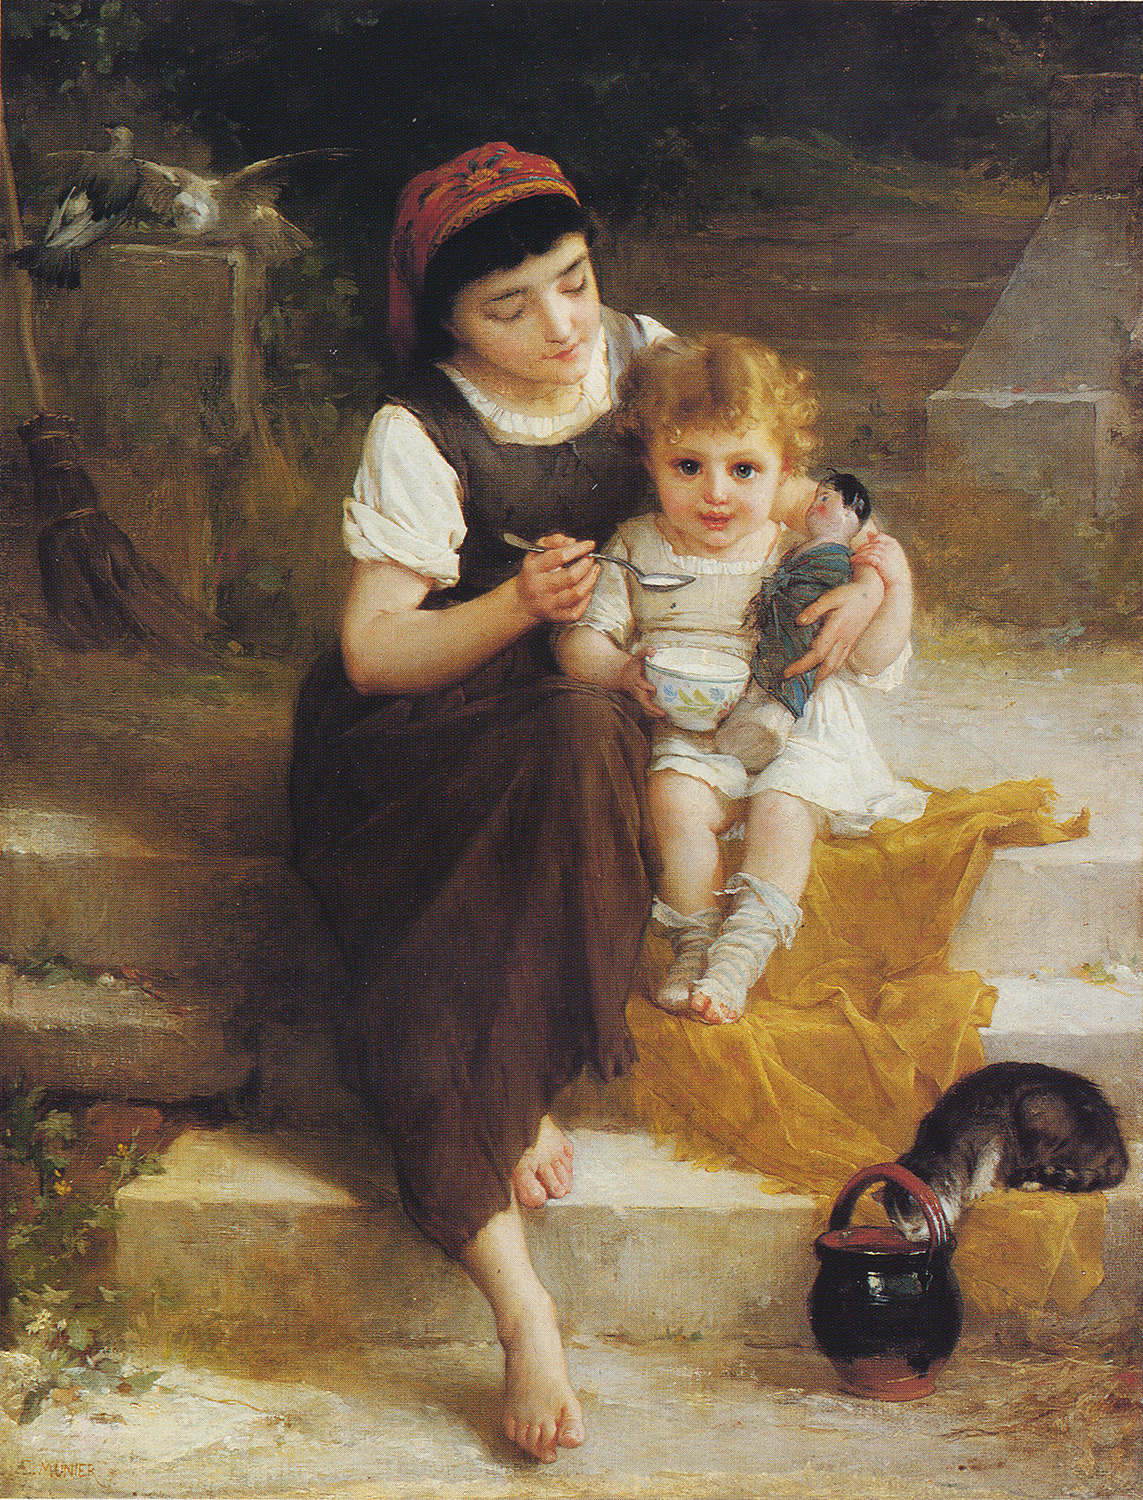 A mother feeing her baby on outdoor steps - Lunch on the Steps - Emile Munier